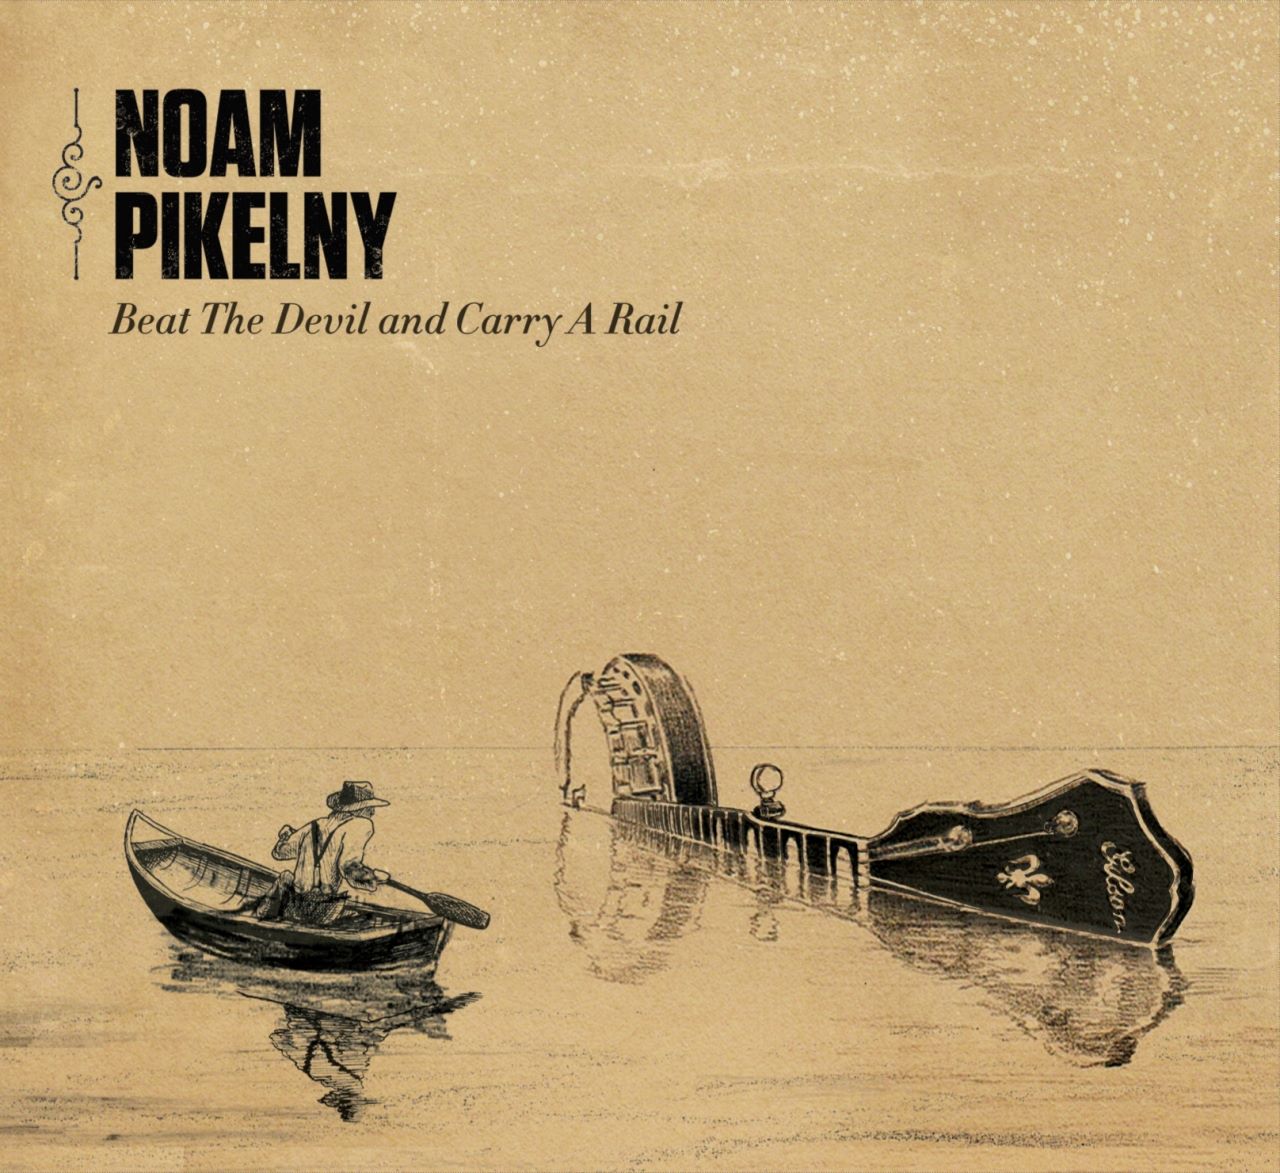 Noam Pikelny - Beat The Devil And Carry A Rail cover album